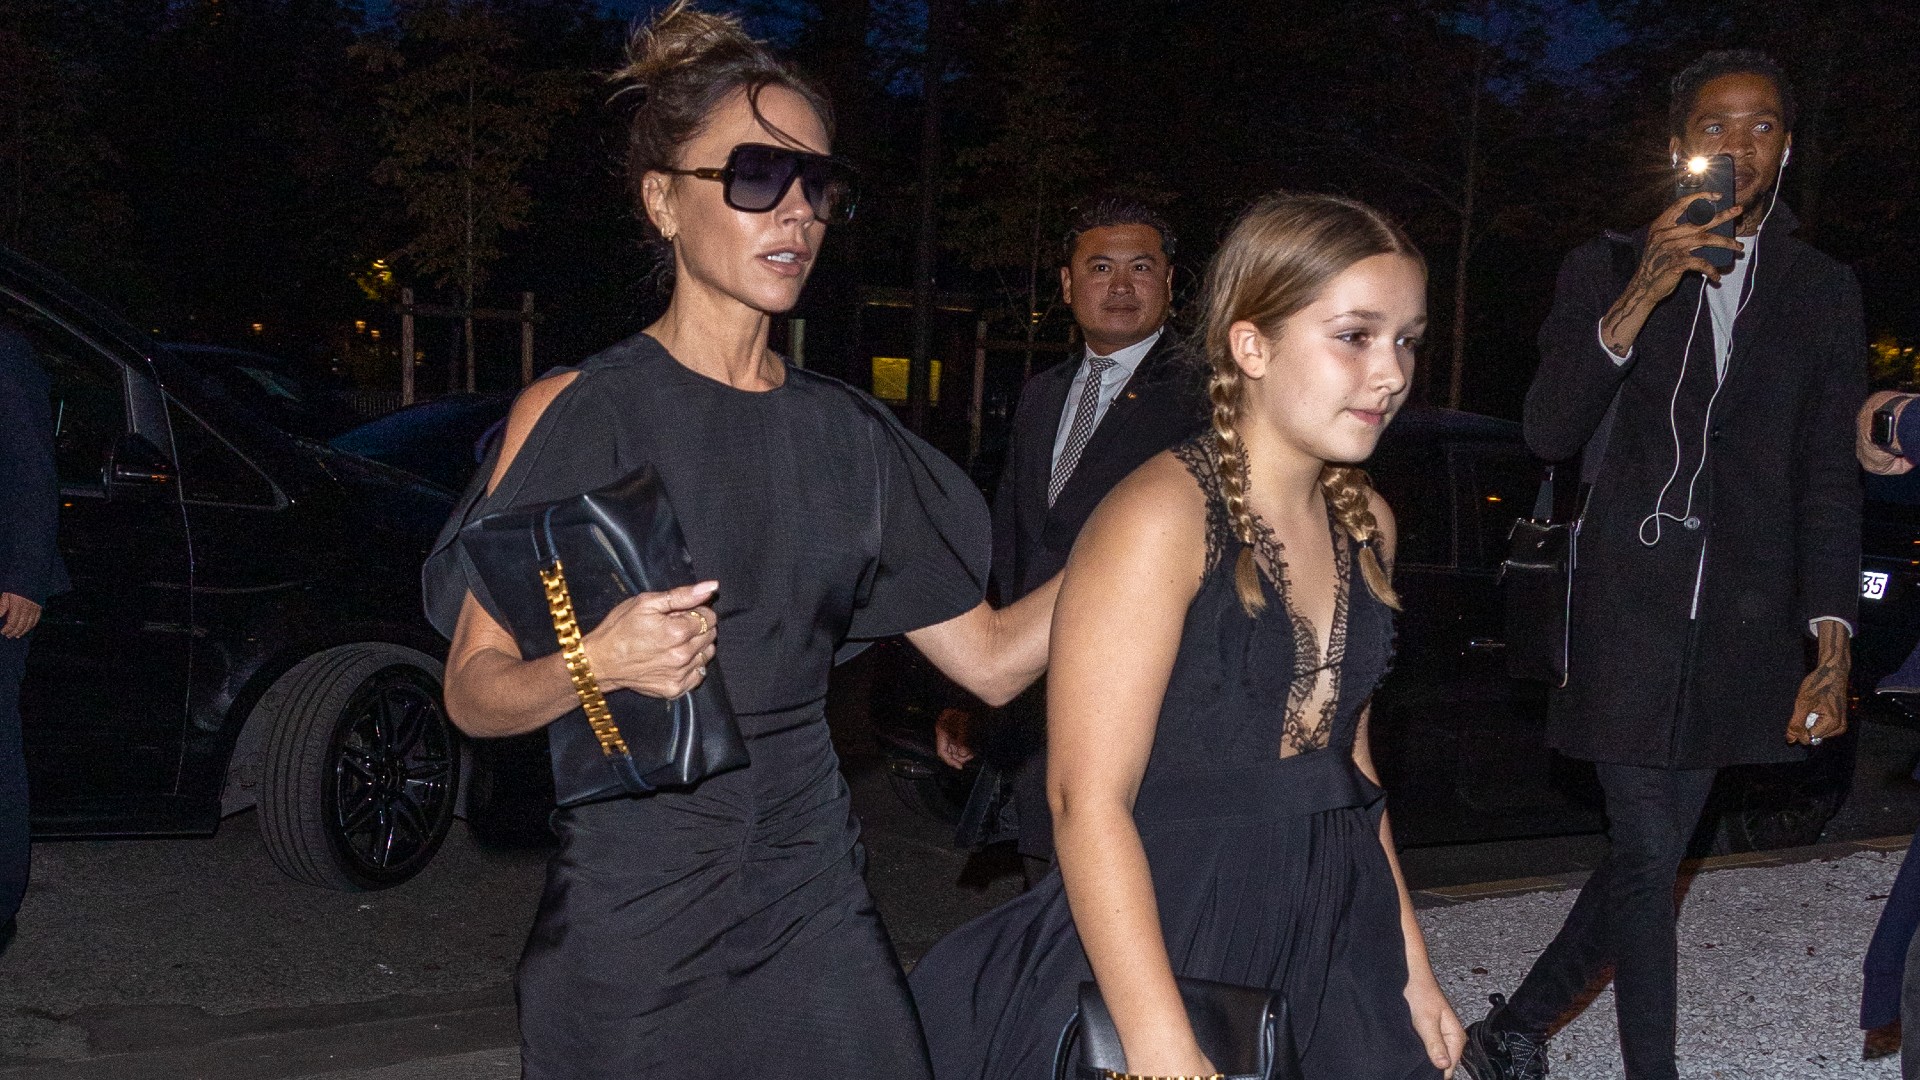 Why Are We Still So Obsessed With Victoria Beckham's Weight?